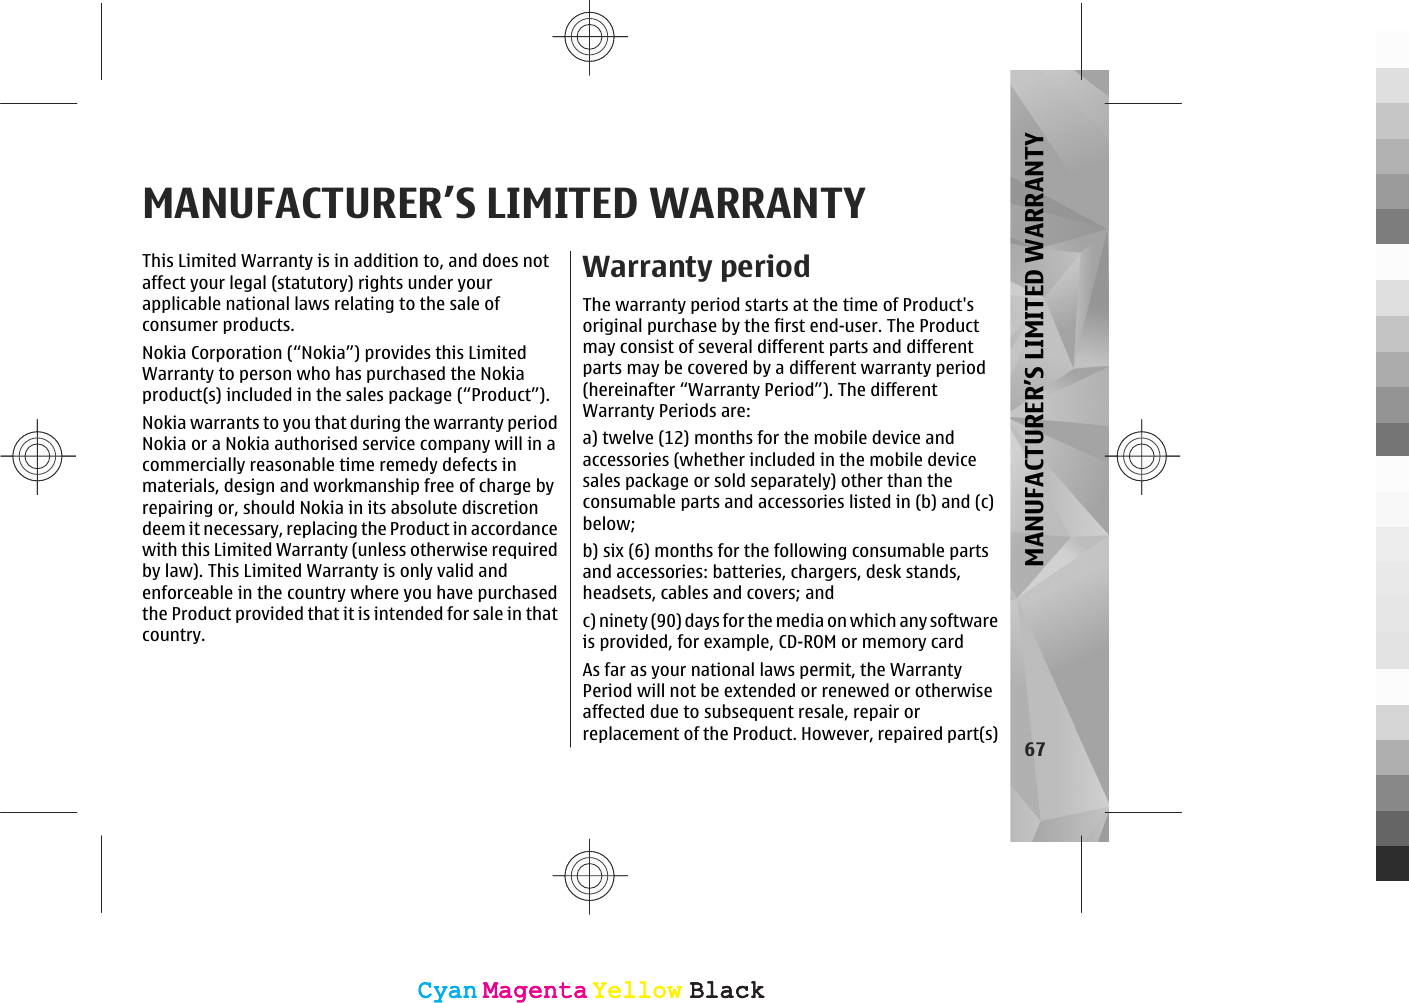 MANUFACTURER’S LIMITED WARRANTYThis Limited Warranty is in addition to, and does notaffect your legal (statutory) rights under yourapplicable national laws relating to the sale ofconsumer products.Nokia Corporation (“Nokia”) provides this LimitedWarranty to person who has purchased the Nokiaproduct(s) included in the sales package (“Product”).Nokia warrants to you that during the warranty periodNokia or a Nokia authorised service company will in acommercially reasonable time remedy defects inmaterials, design and workmanship free of charge byrepairing or, should Nokia in its absolute discretiondeem it necessary, replacing the Product in accordancewith this Limited Warranty (unless otherwise requiredby law). This Limited Warranty is only valid andenforceable in the country where you have purchasedthe Product provided that it is intended for sale in thatcountry.Warranty periodThe warranty period starts at the time of Product&apos;soriginal purchase by the first end-user. The Productmay consist of several different parts and differentparts may be covered by a different warranty period(hereinafter “Warranty Period”). The differentWarranty Periods are:a) twelve (12) months for the mobile device andaccessories (whether included in the mobile devicesales package or sold separately) other than theconsumable parts and accessories listed in (b) and (c)below;b) six (6) months for the following consumable partsand accessories: batteries, chargers, desk stands,headsets, cables and covers; andc) ninety (90) days for the media on which any softwareis provided, for example, CD-ROM or memory cardAs far as your national laws permit, the WarrantyPeriod will not be extended or renewed or otherwiseaffected due to subsequent resale, repair orreplacement of the Product. However, repaired part(s) 67MANUFACTURER’S LIMITED WARRANTYCyanCyanMagentaMagentaYellowYellowBlackBlackCyanCyanMagentaMagentaYellowYellowBlackBlack